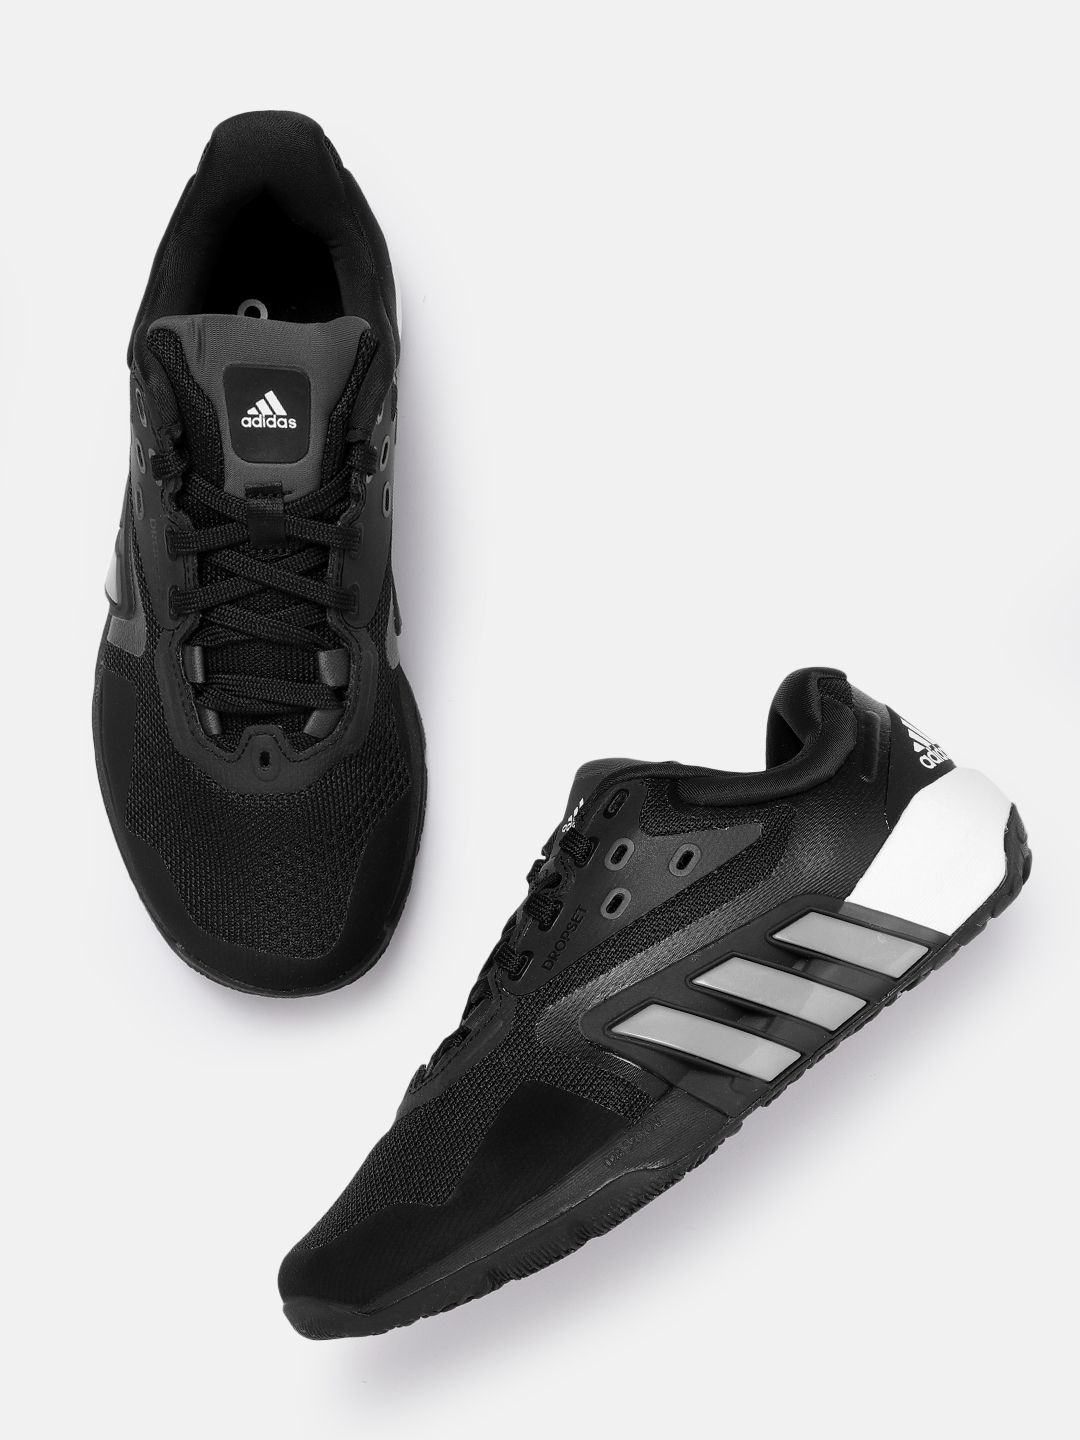 ADIDAS Women Black Woven Design Dropset Training Shoes Price in India